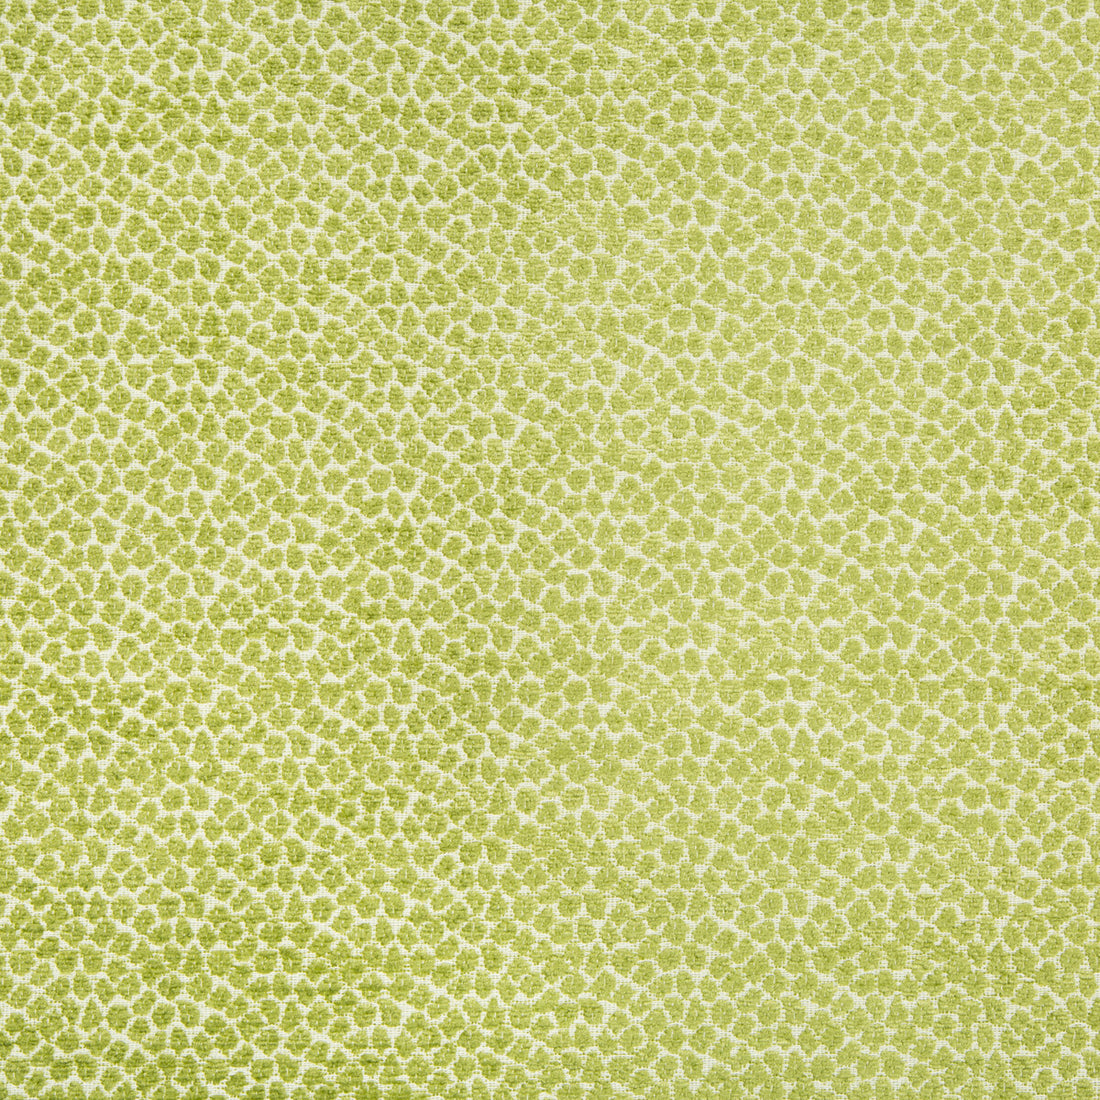 Kravet Design fabric in 34682-3 color - pattern 34682.3.0 - by Kravet Design in the Crypton Home collection